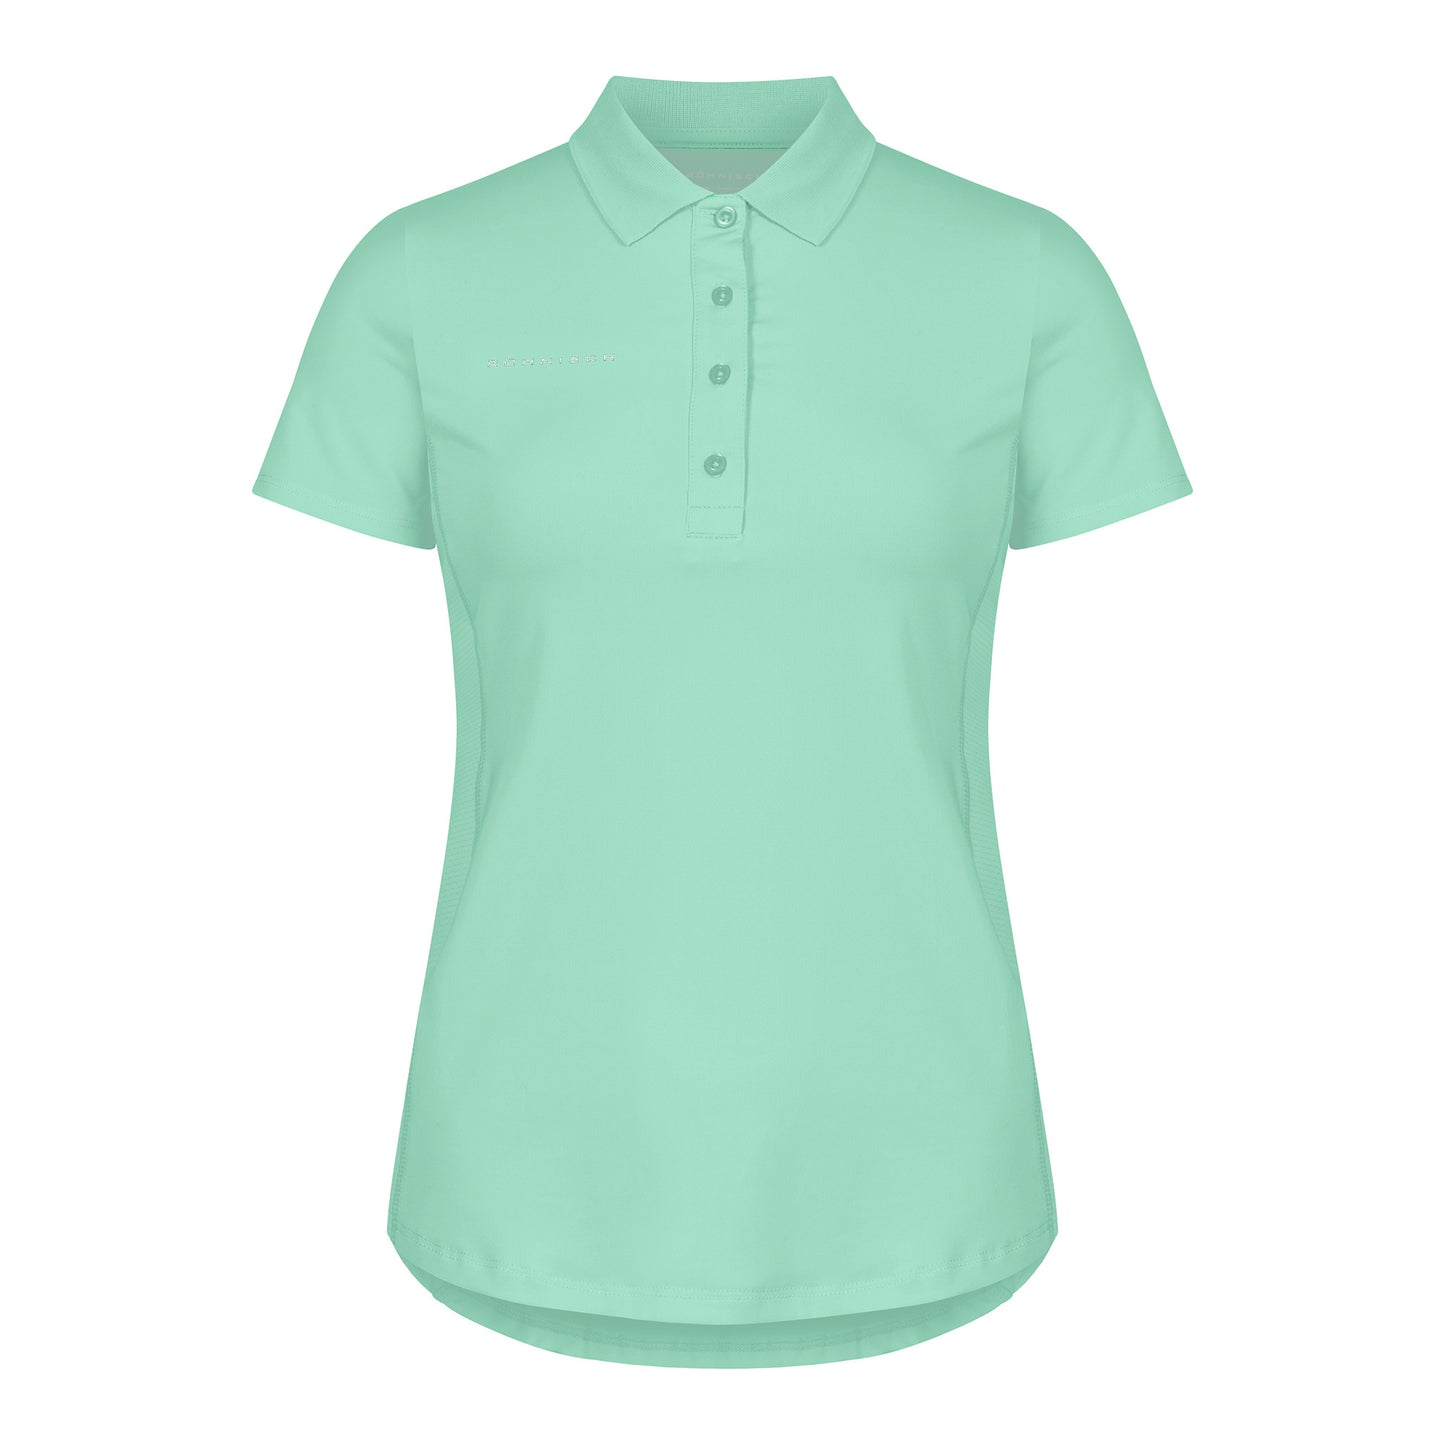 Rohnisch Women's Short Sleeve Polo with Textured Panels in Ice Green